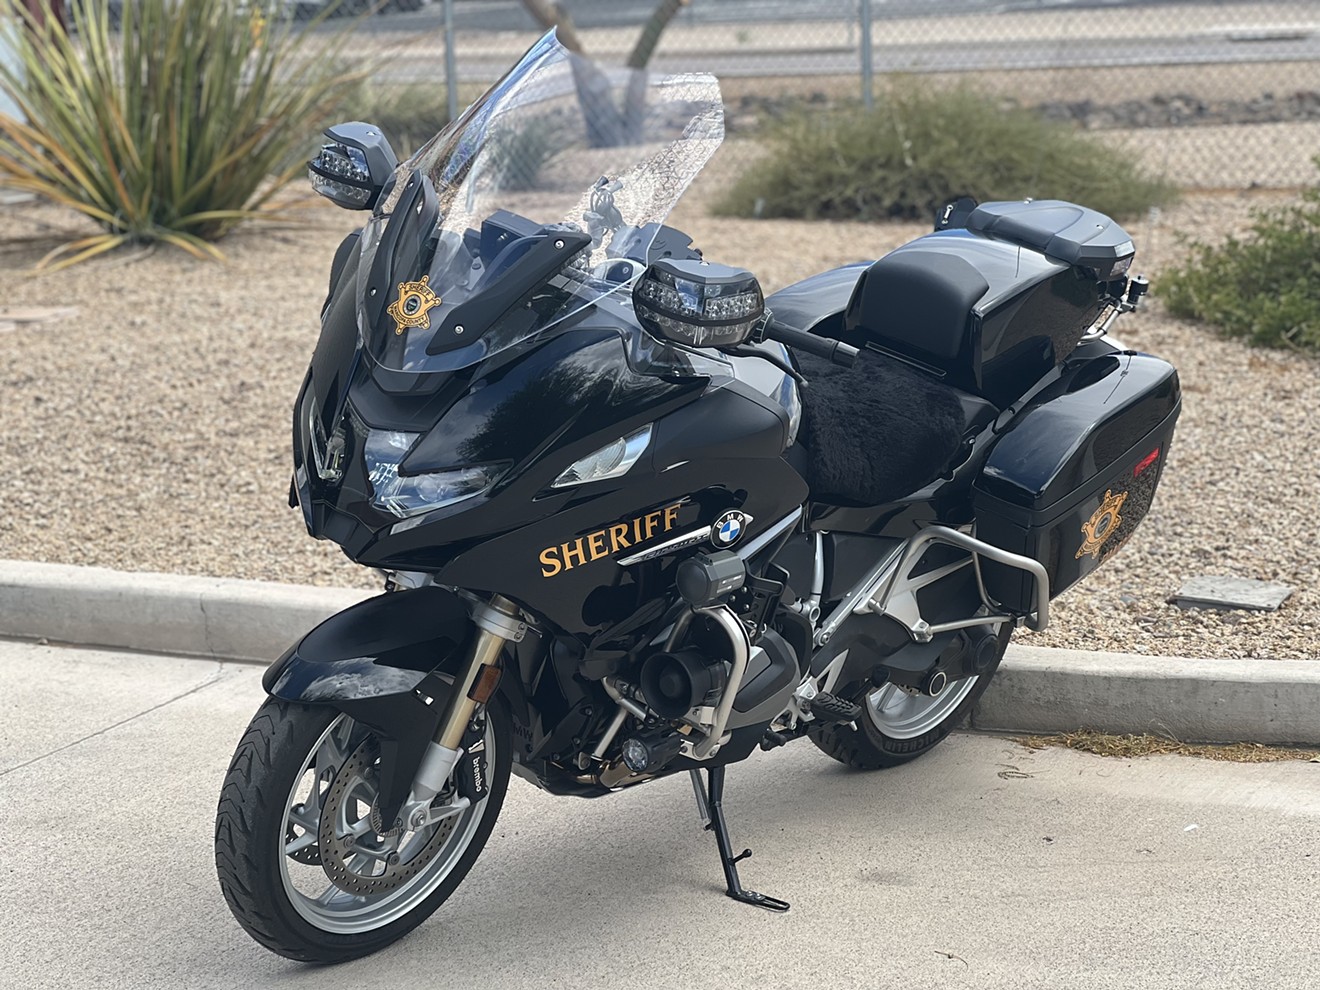 Five BMW motorcycles and two Ford Mustangs make up the new traffic unit for the Maricopa County Sheriff's Office.